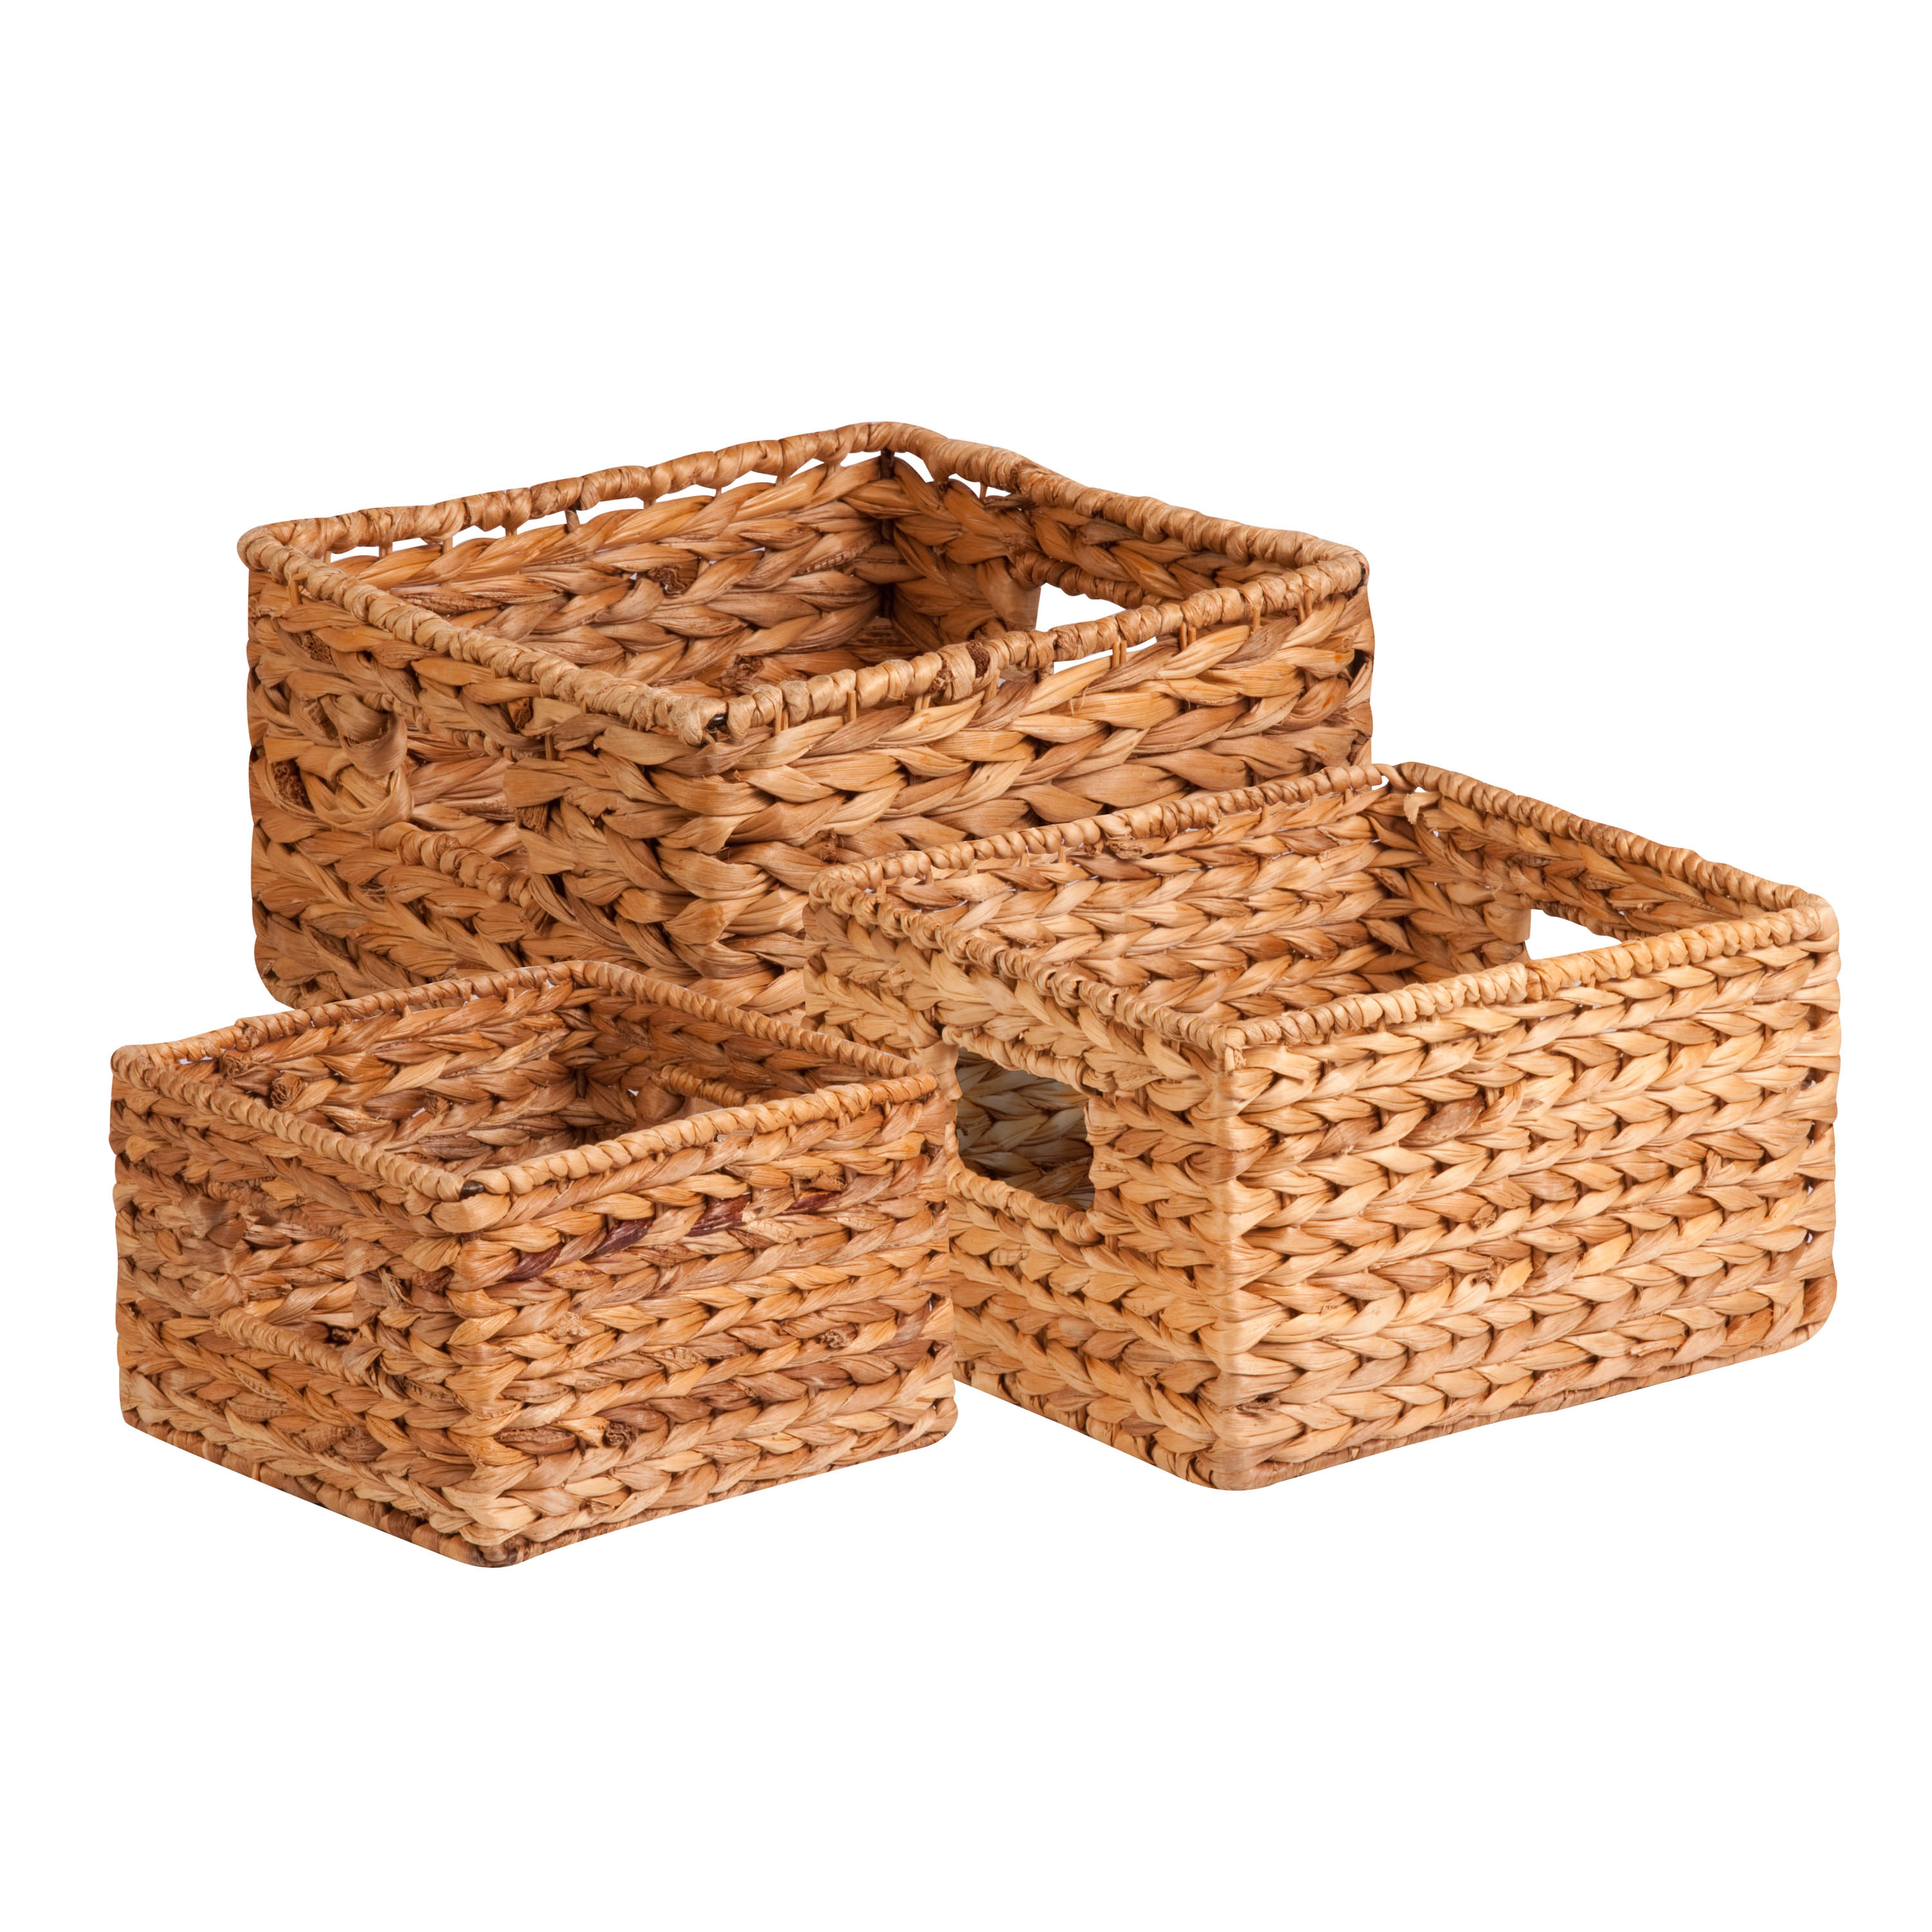 Honey-Can-Do Set of 3 Wicker Storage Nesting Baskets with Handles - image 1 of 5